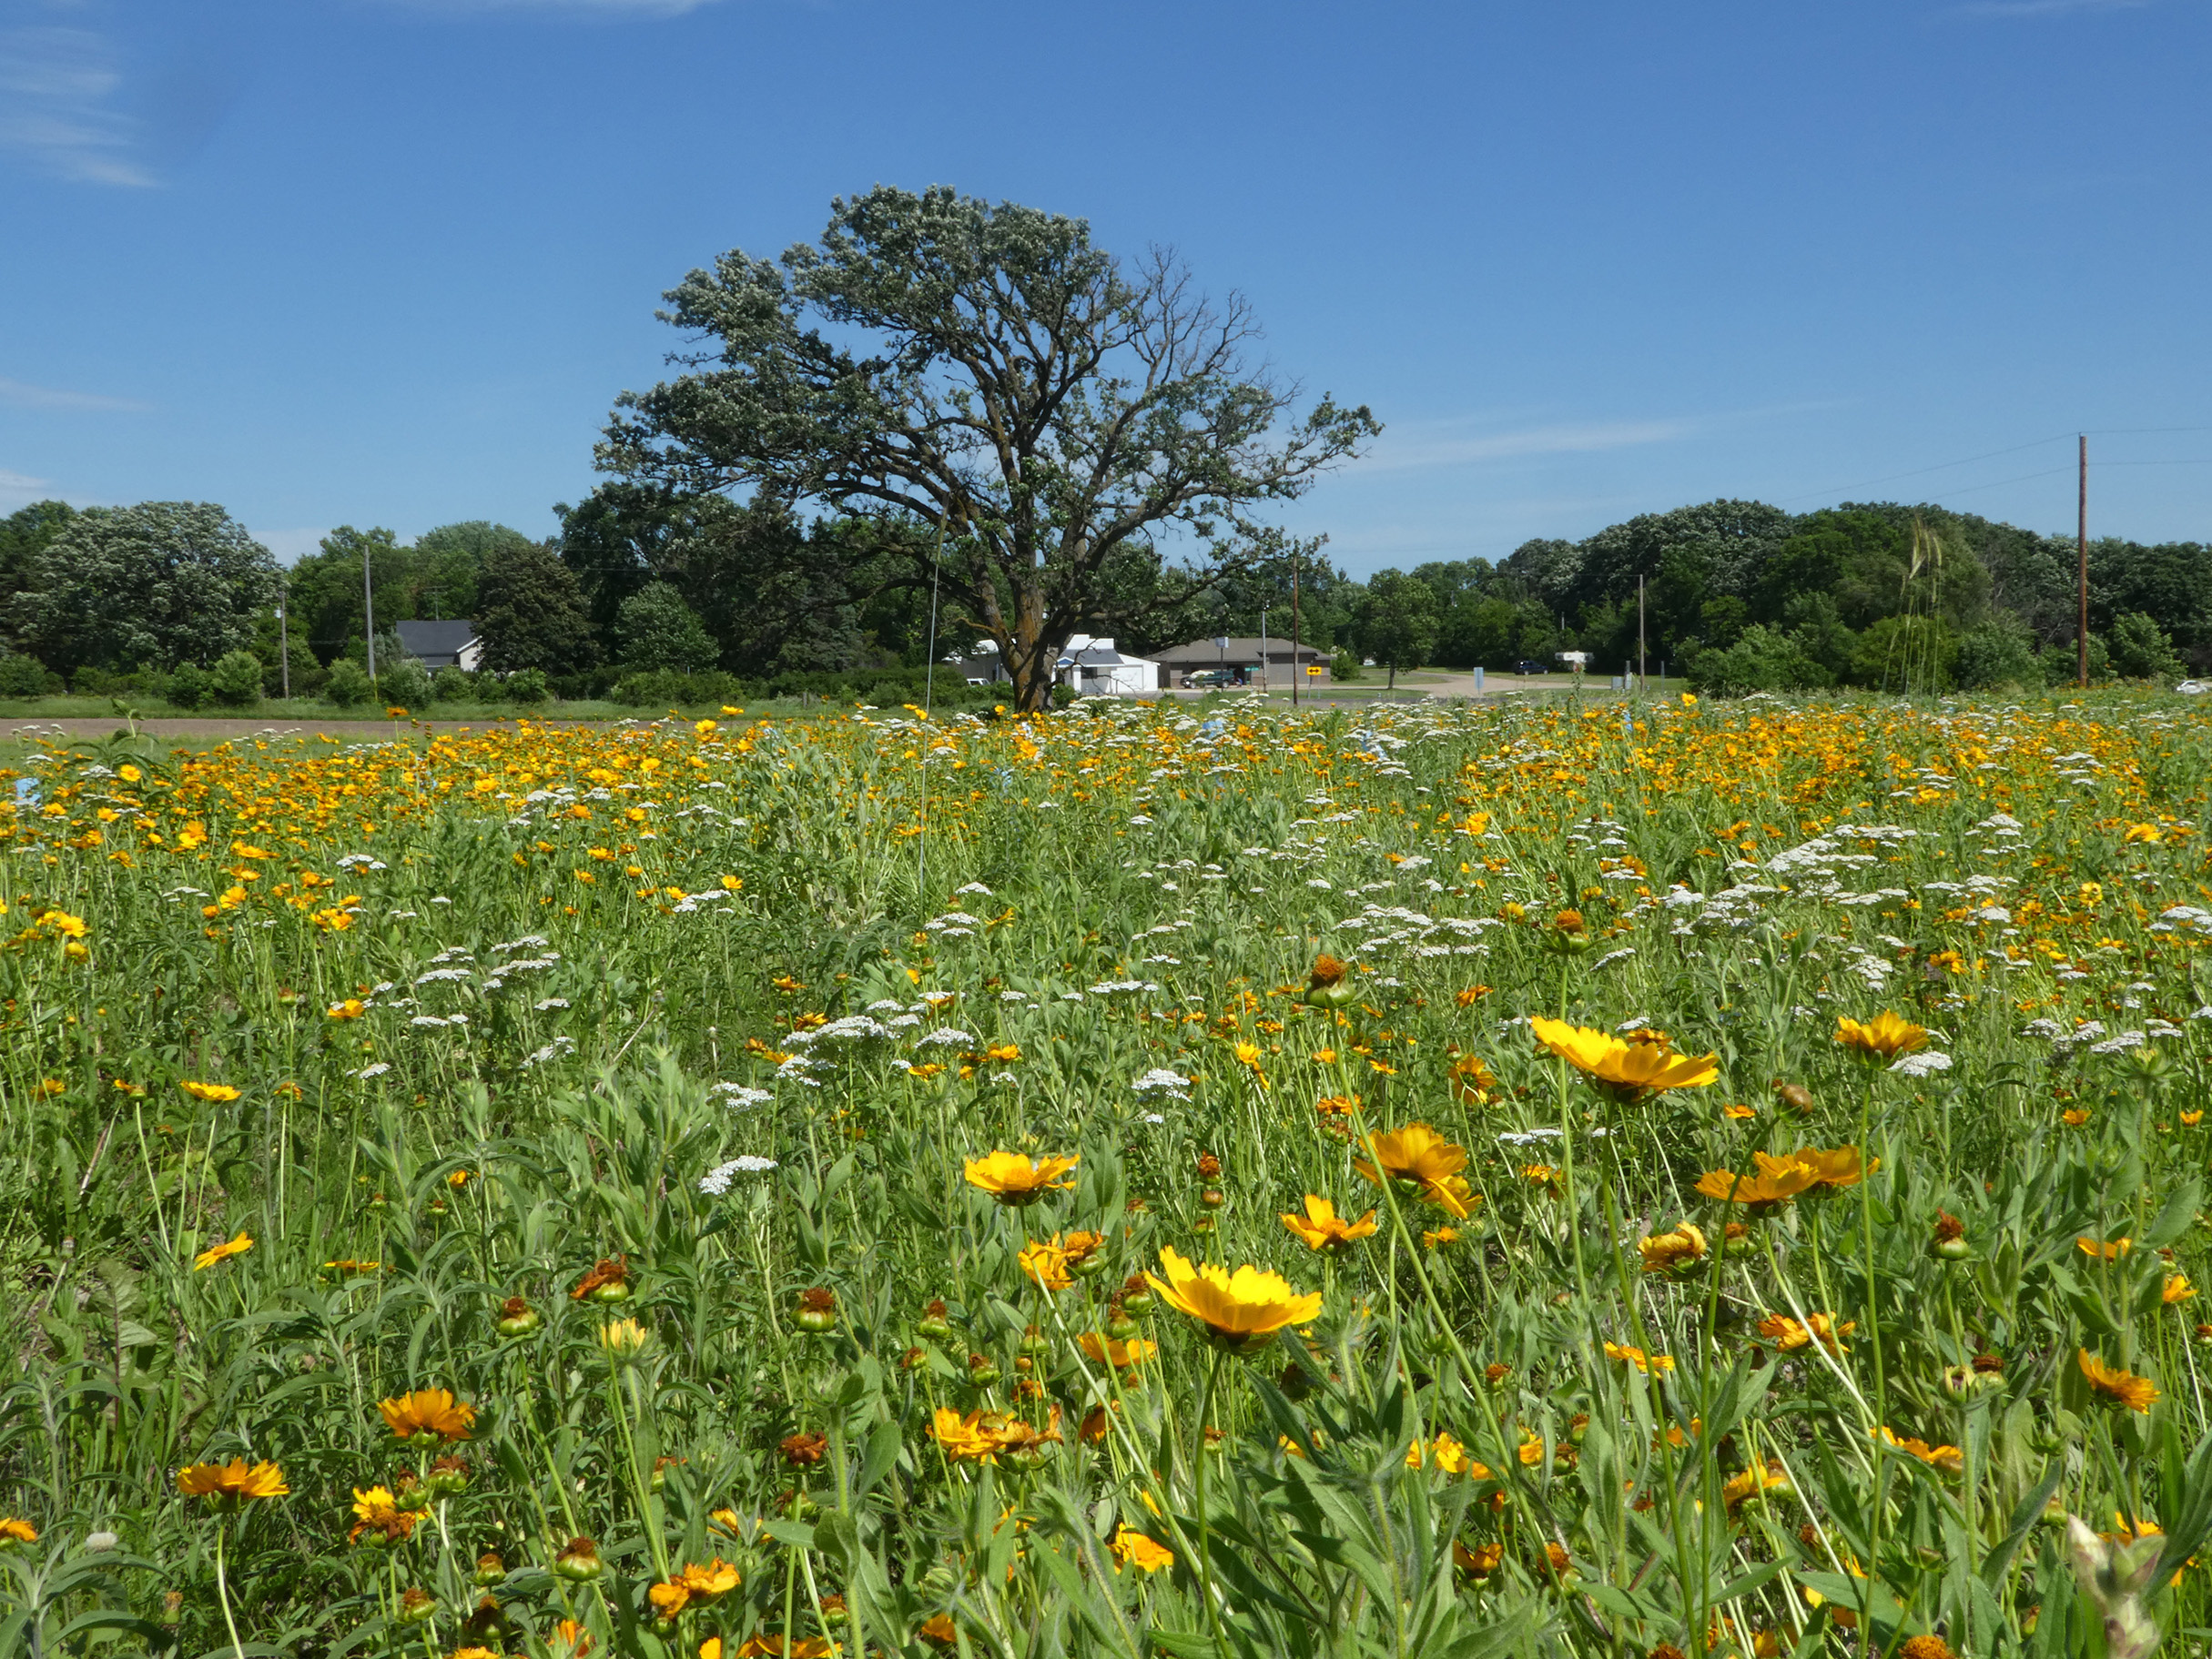 A field of yellow and white wildflowers bloom in the sunshine. A spreading tree and farm building are in the background.